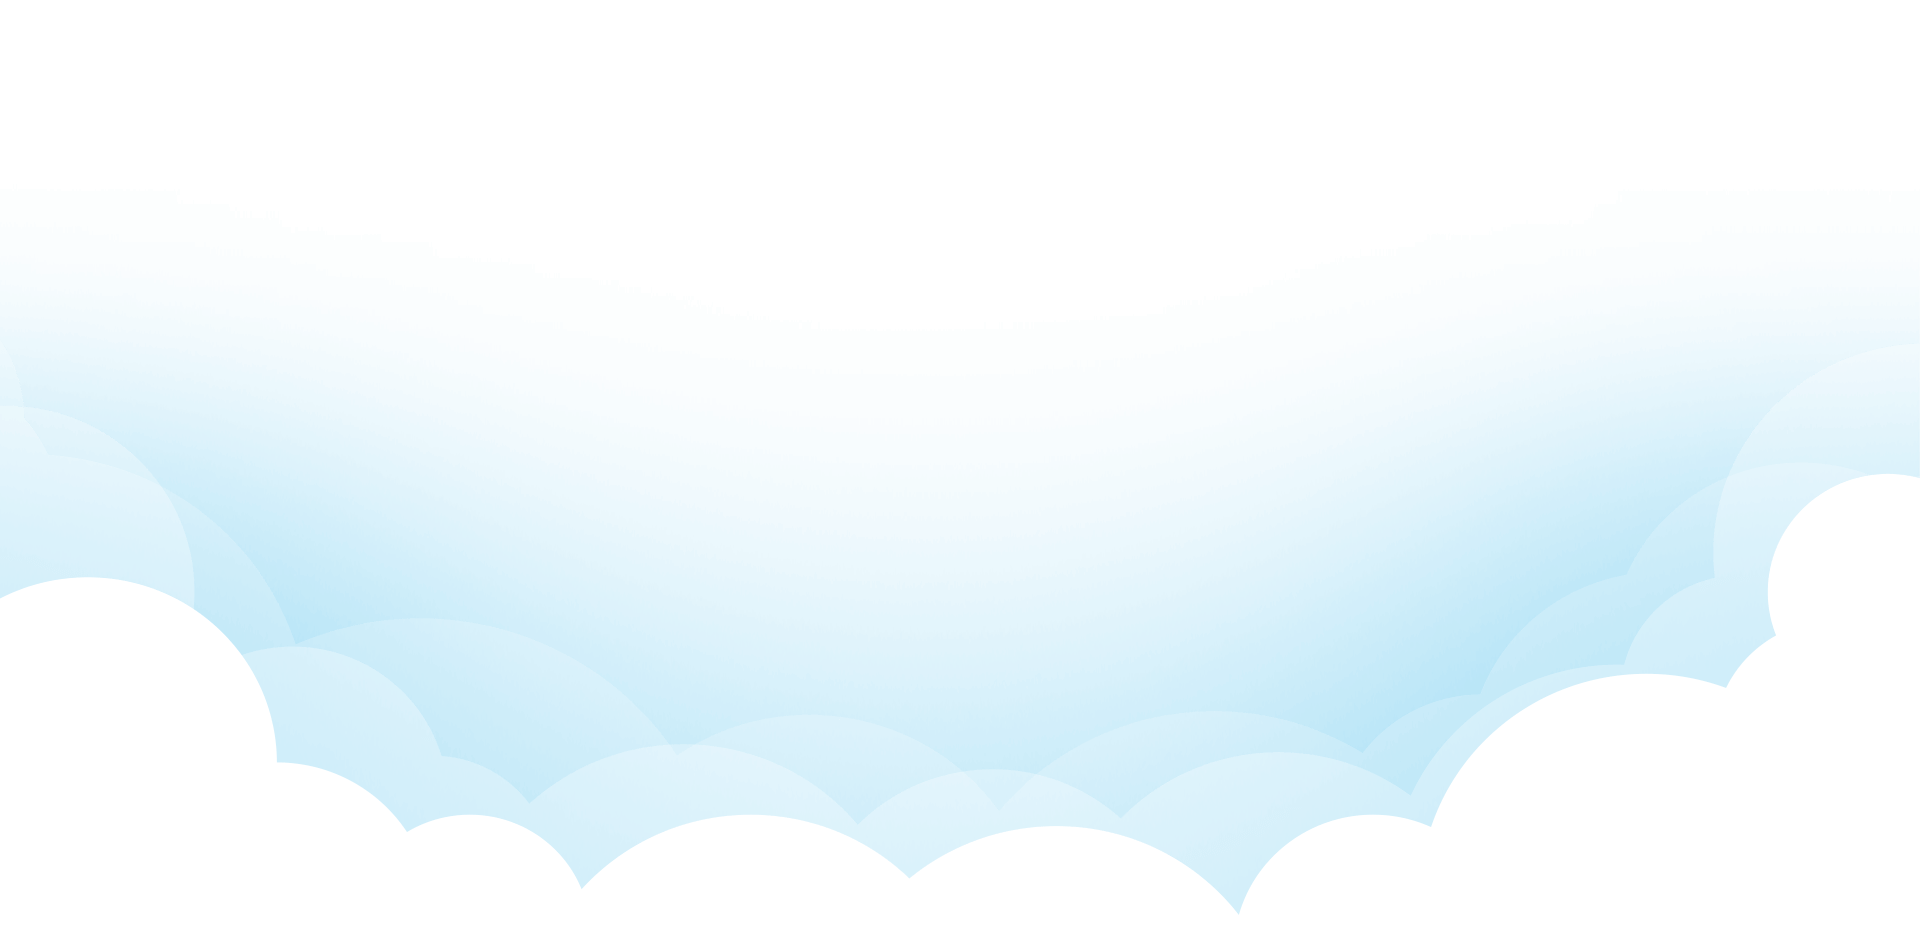 cloud-overlay-2.png